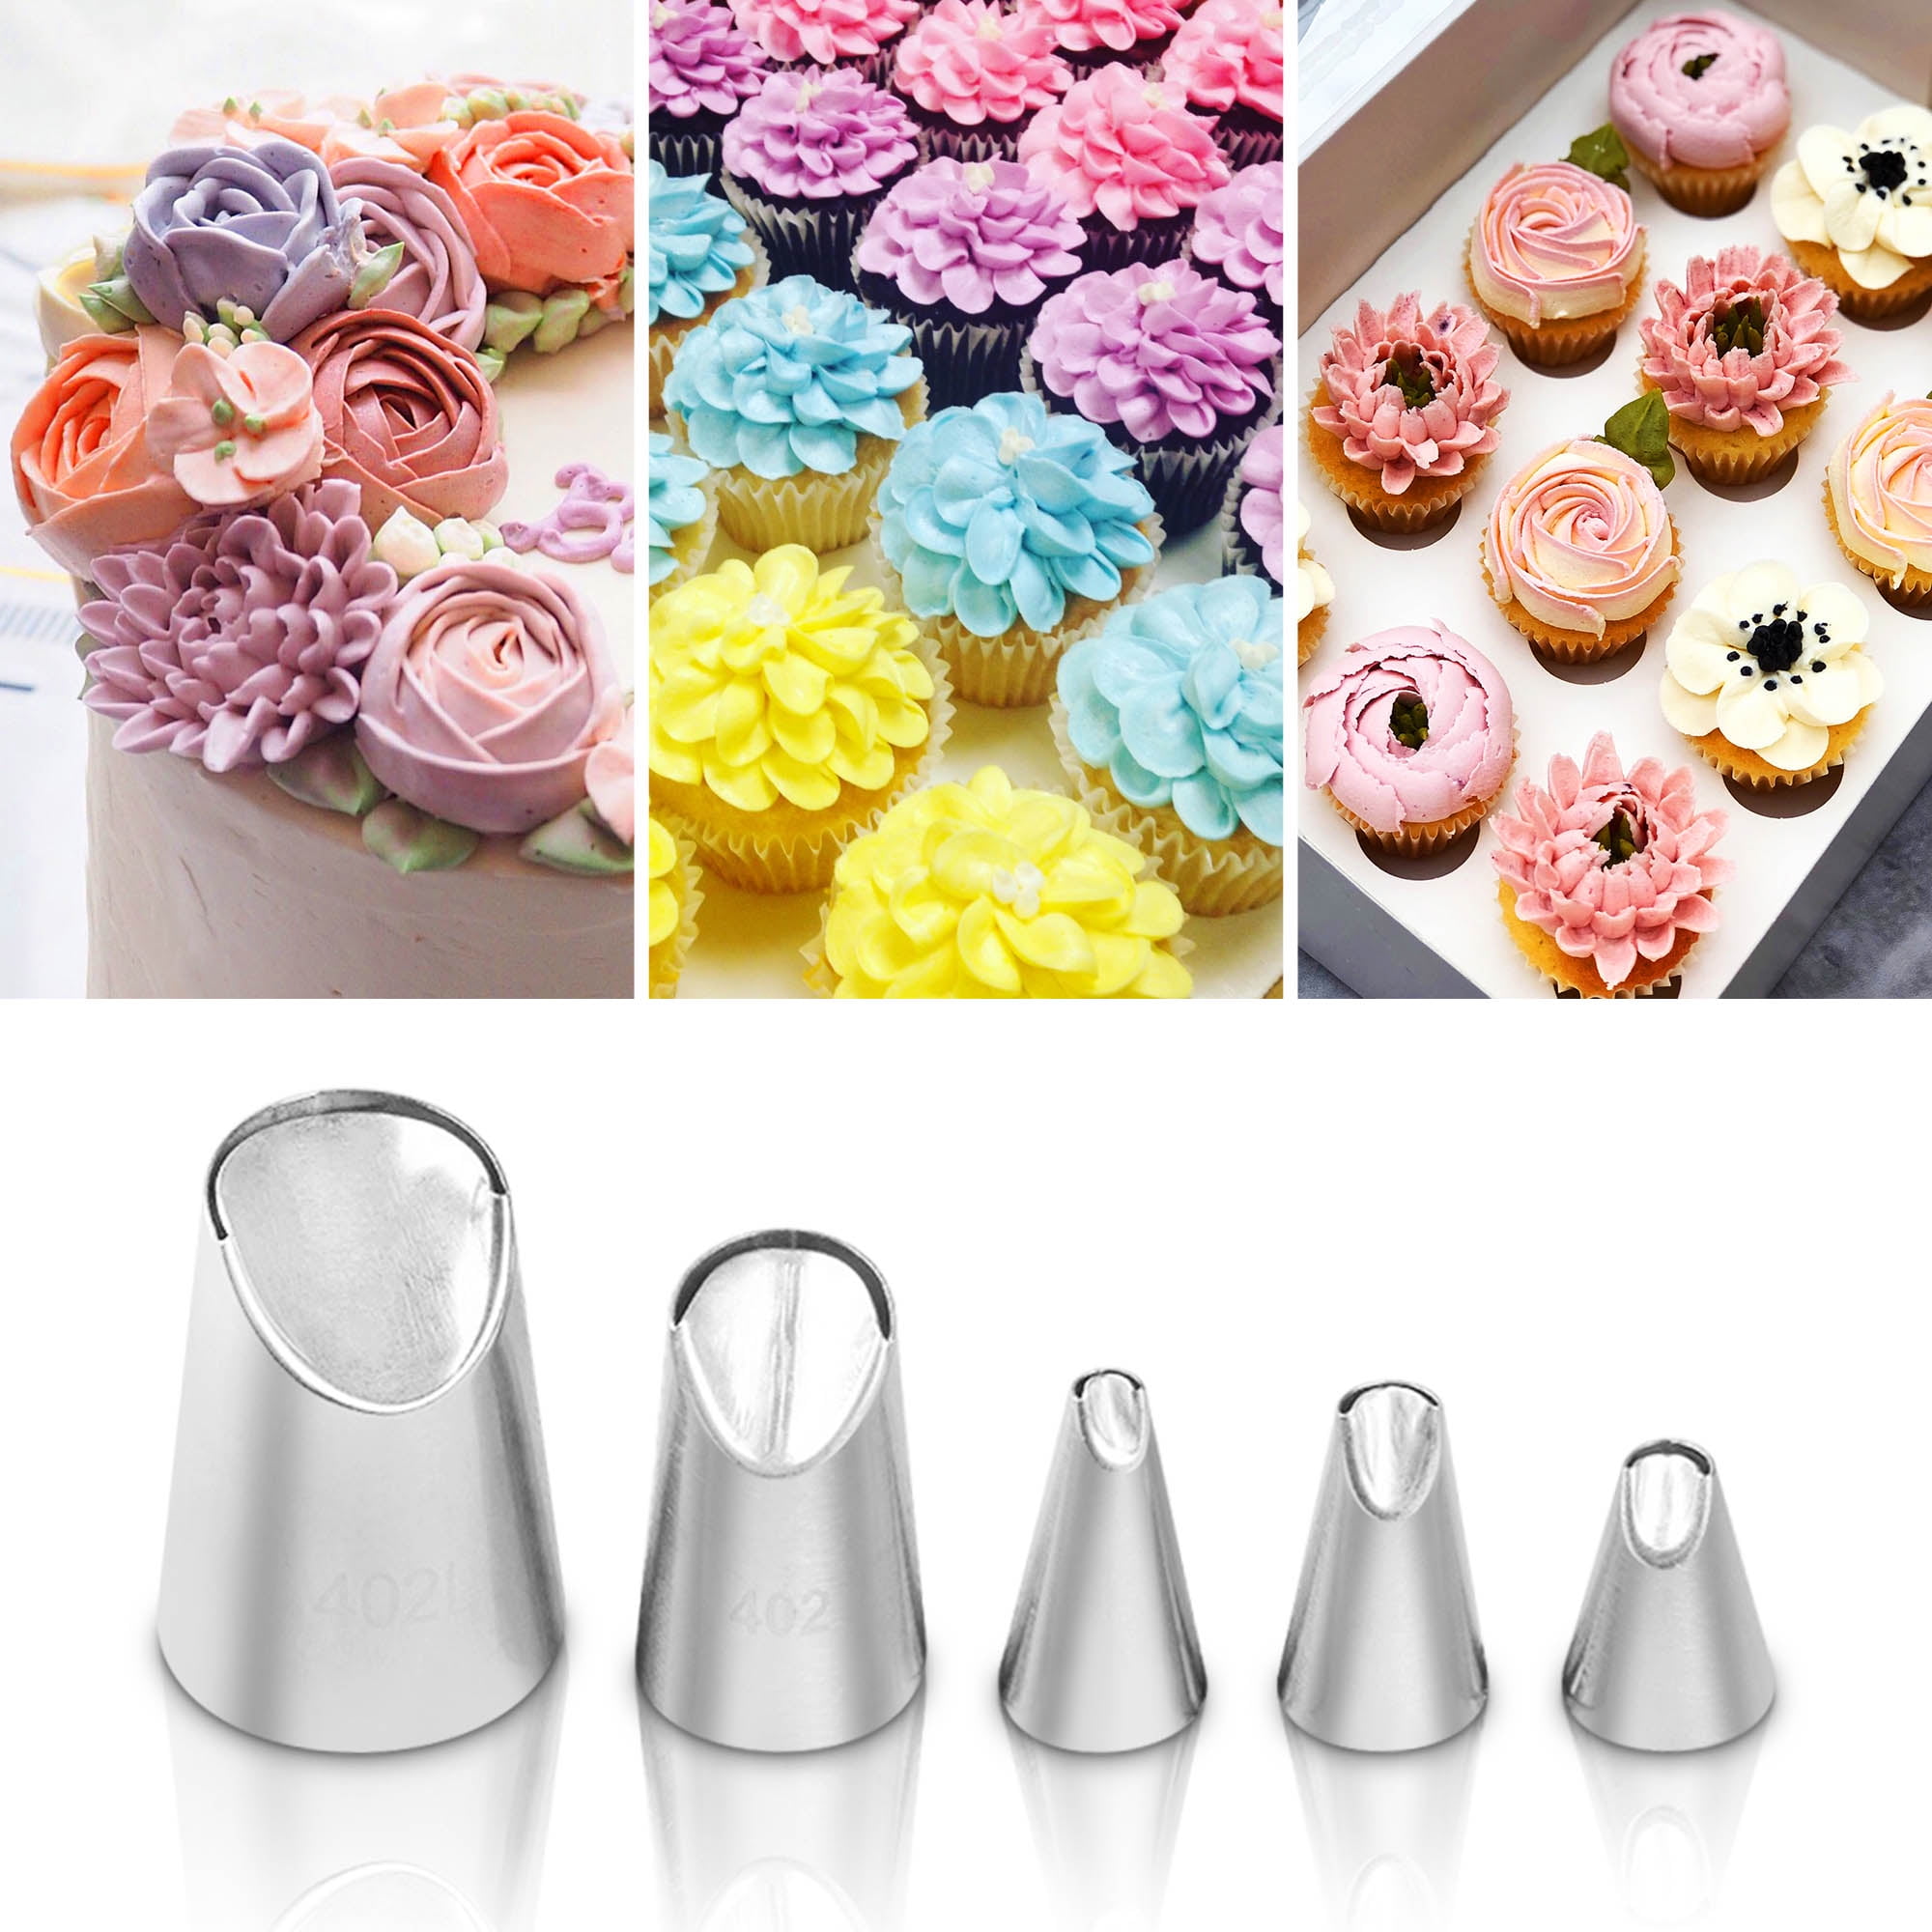 Cake Flower Icing Piping Frosting Nozzles Tips Decorating Baking Cake Tip ToolLL 